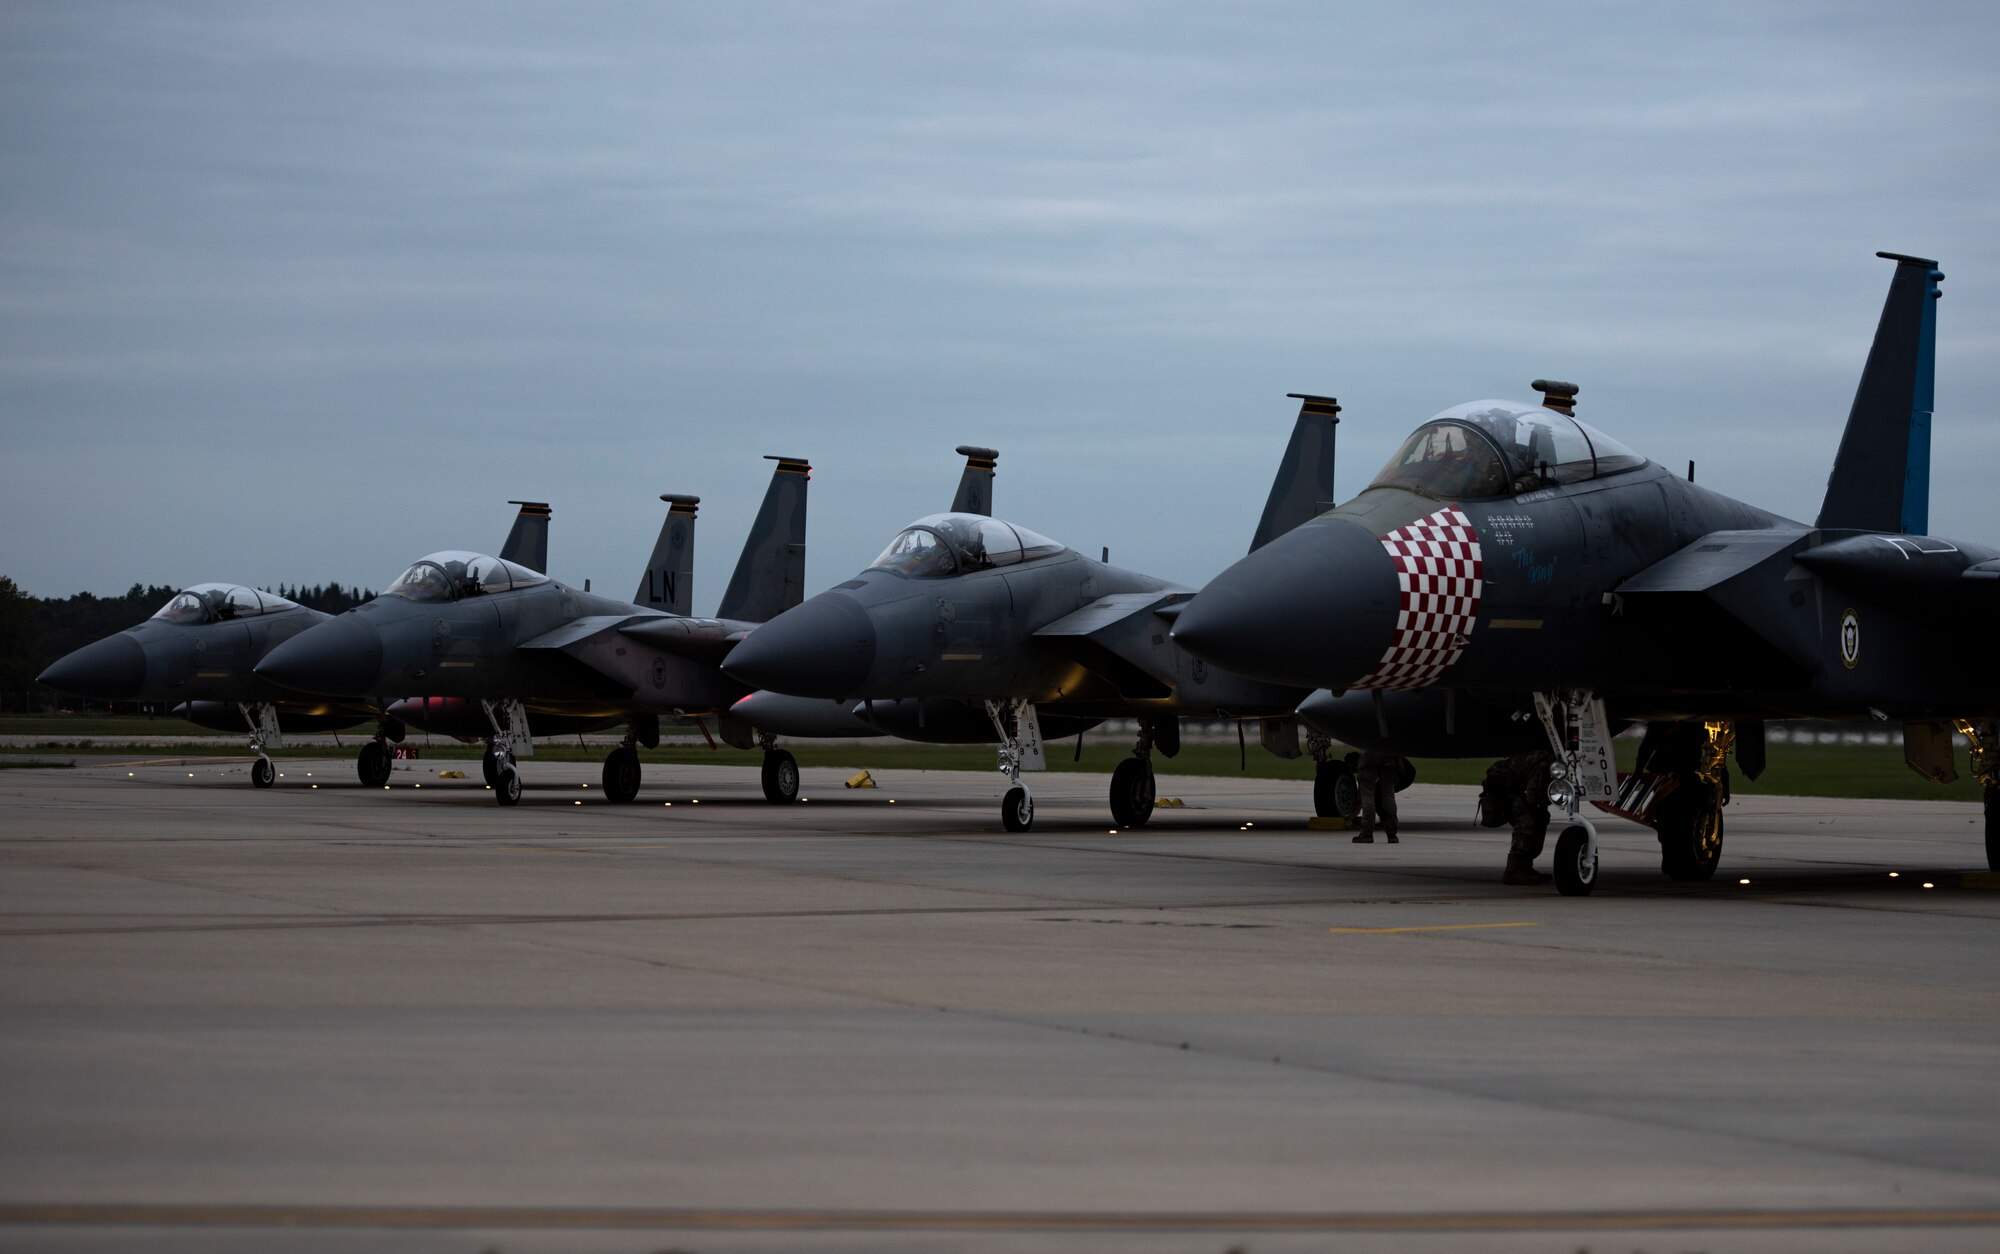 F-15C Eagles, assigned to the 493rd Fighter Squadron, line the taxiway for pre-flight checks at Royal Air Force Lakenheath, England, Sept. 10, 2020. Night Flying Exercises provide 48th Fighter Wing aircrew and support personnel the experience needed to maintain a ready force capable of ensuring the collective defence of the NATO alliance. (U.S. Air Force photo by Airman 1st Class Jessi Monte)